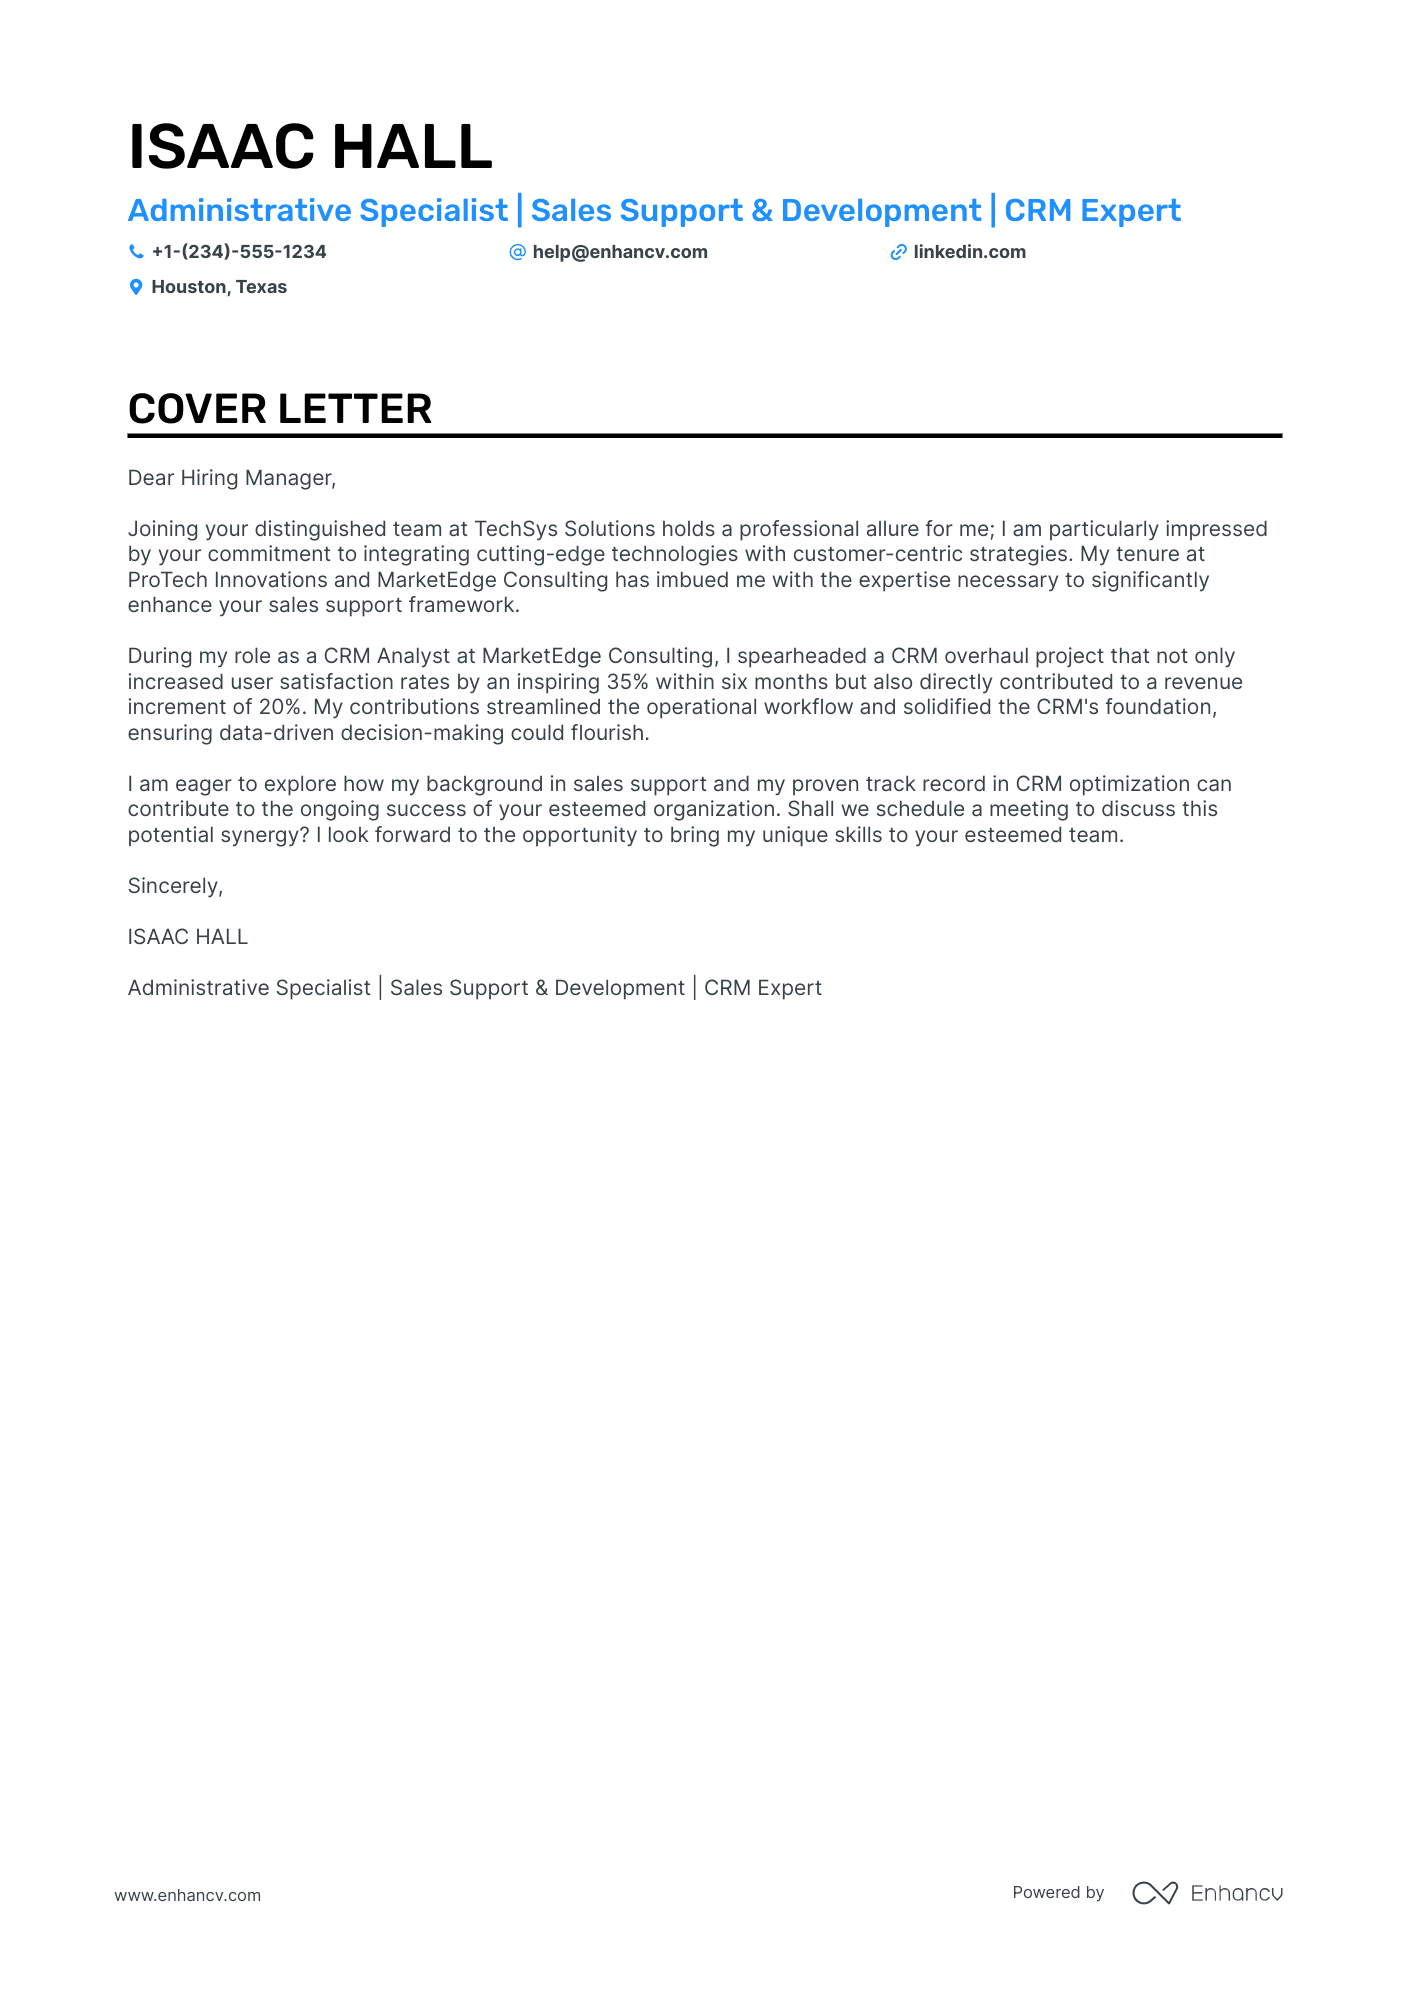 cover letter for administrative assistant examples